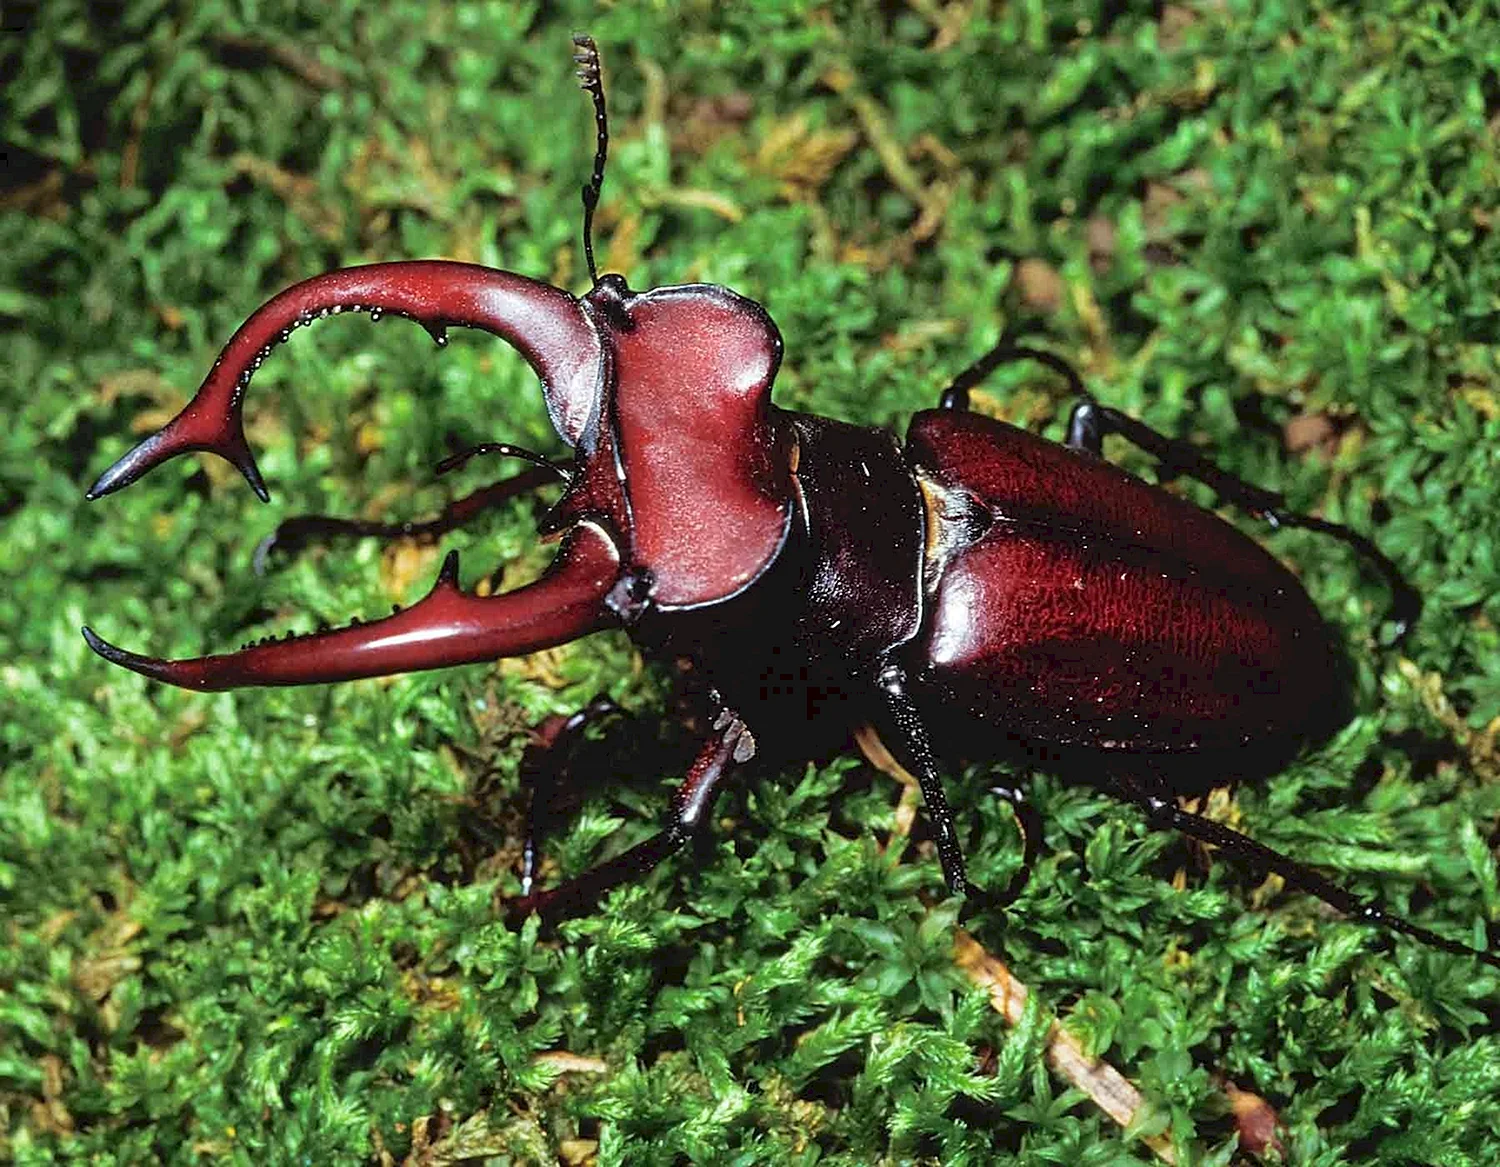 Giant Stag Beetle